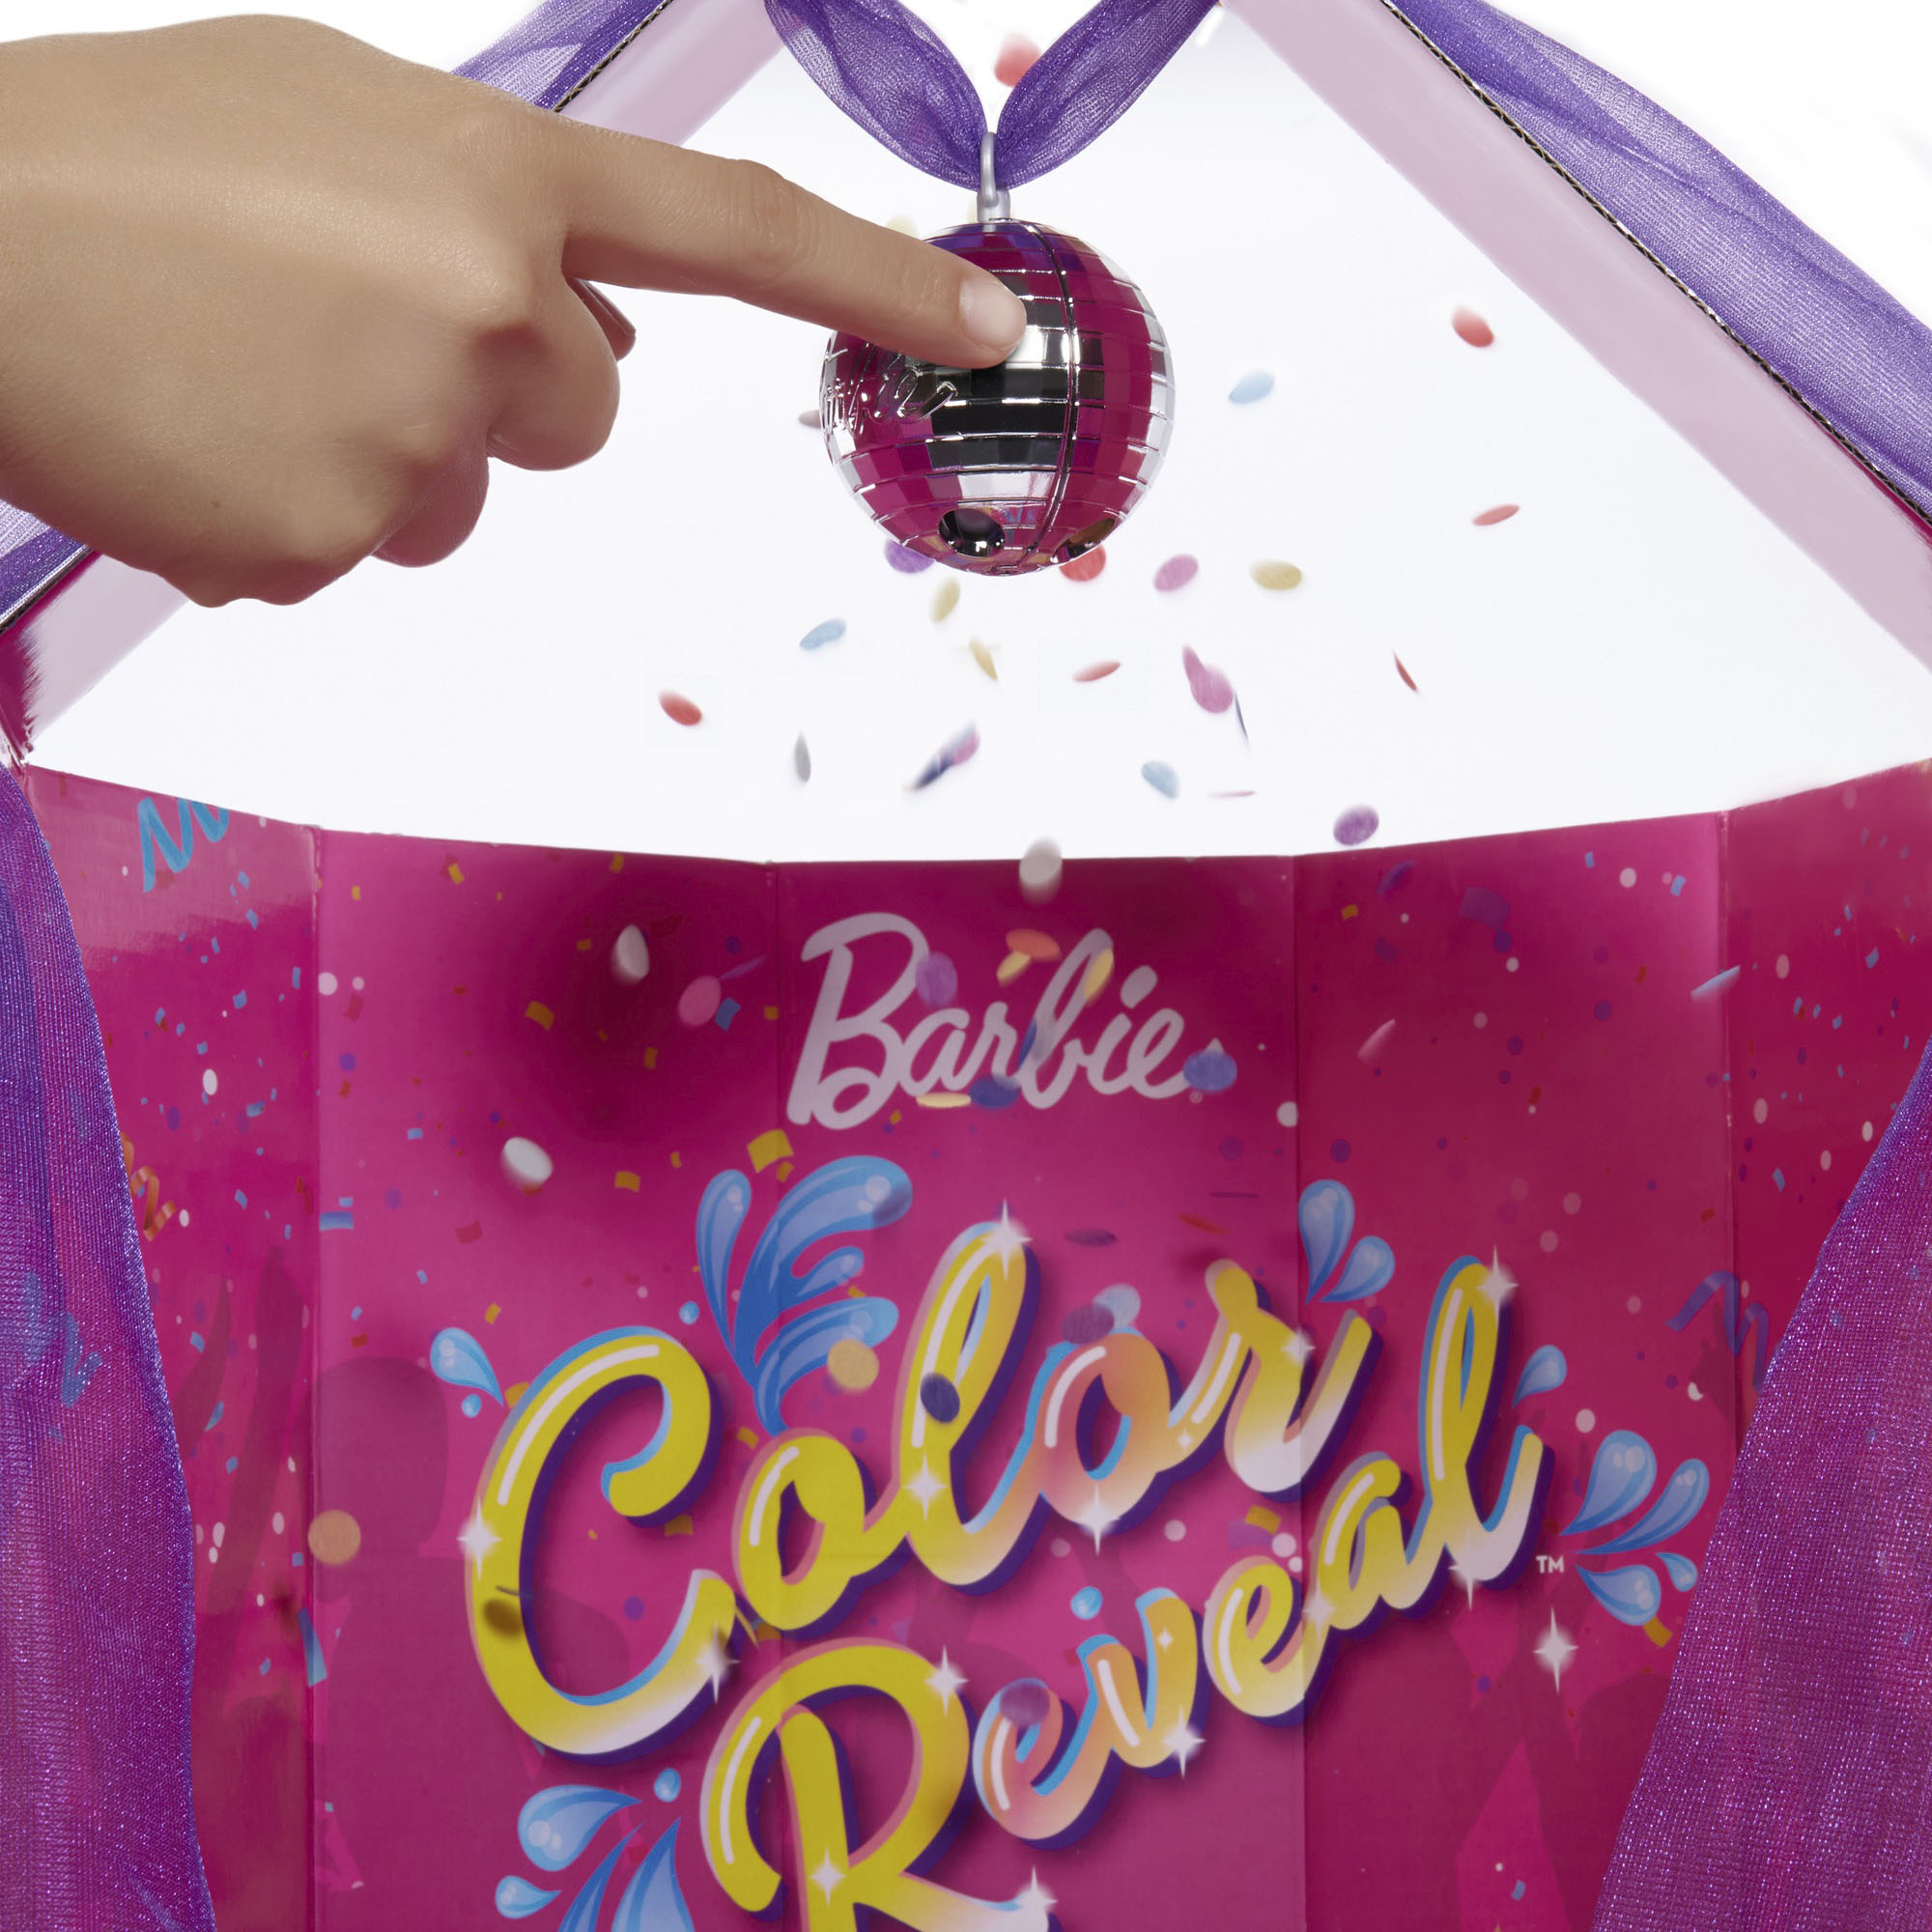 Best Buy: Barbie Color Reveal Surprise Party Dolls and Accessories Multi  GXJ88